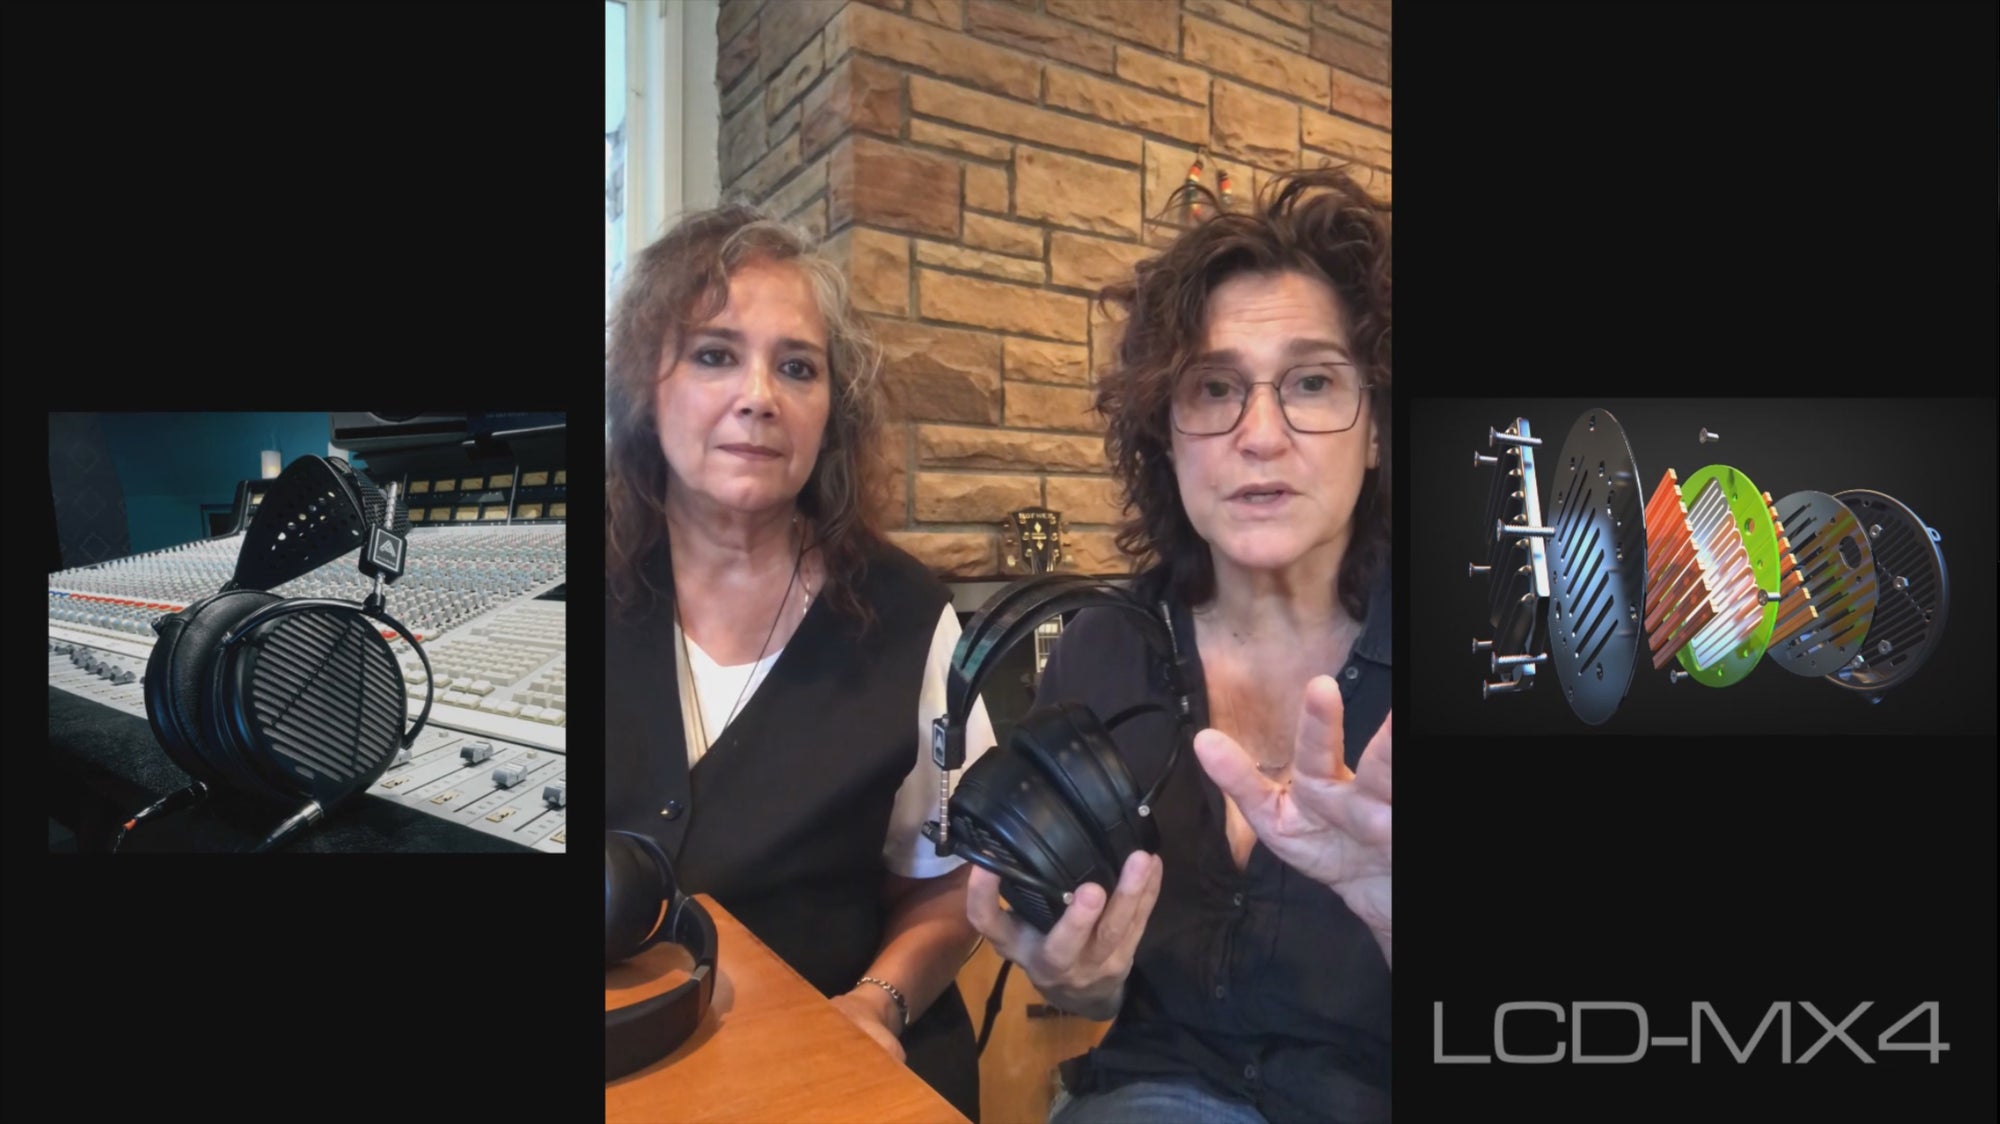 Wendy and Lisa of Prince and the Revolution Compare the LCD-MX4 to the LCD-1